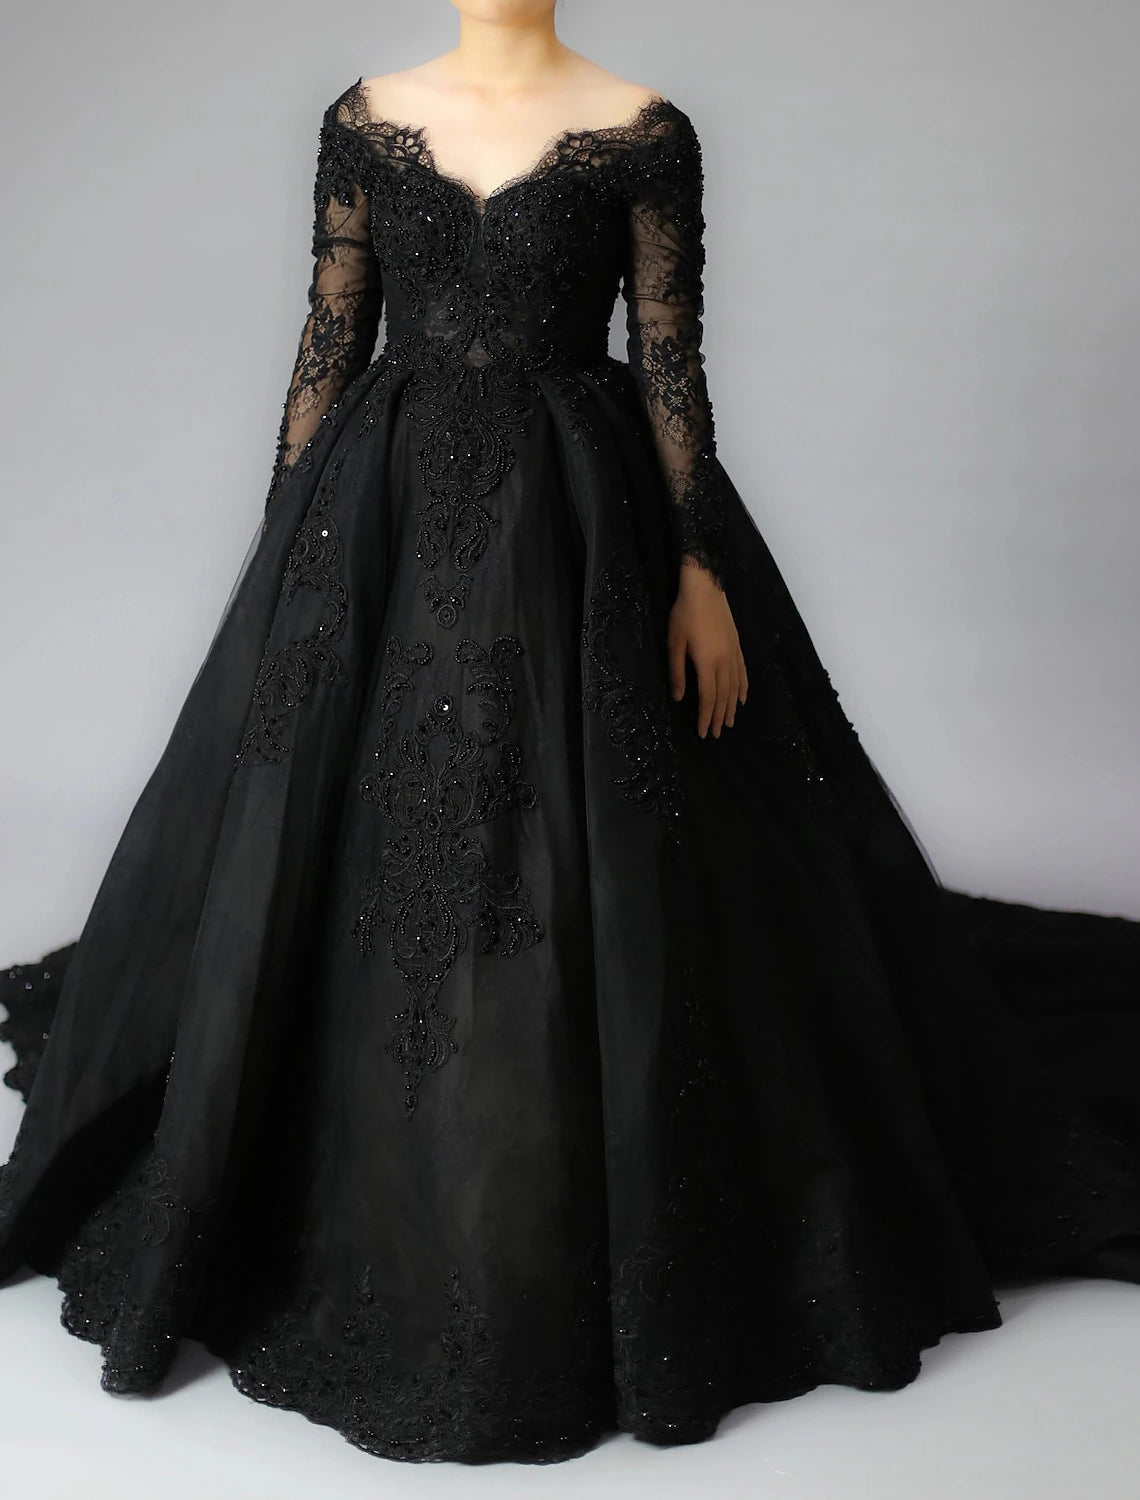 Black Wedding Dresses Formal Ball Gown V Neck Long Sleeve Chapel Train Lace Satin Gothic Fall Halloween Reception Bridal Gowns With Pleats Appliques